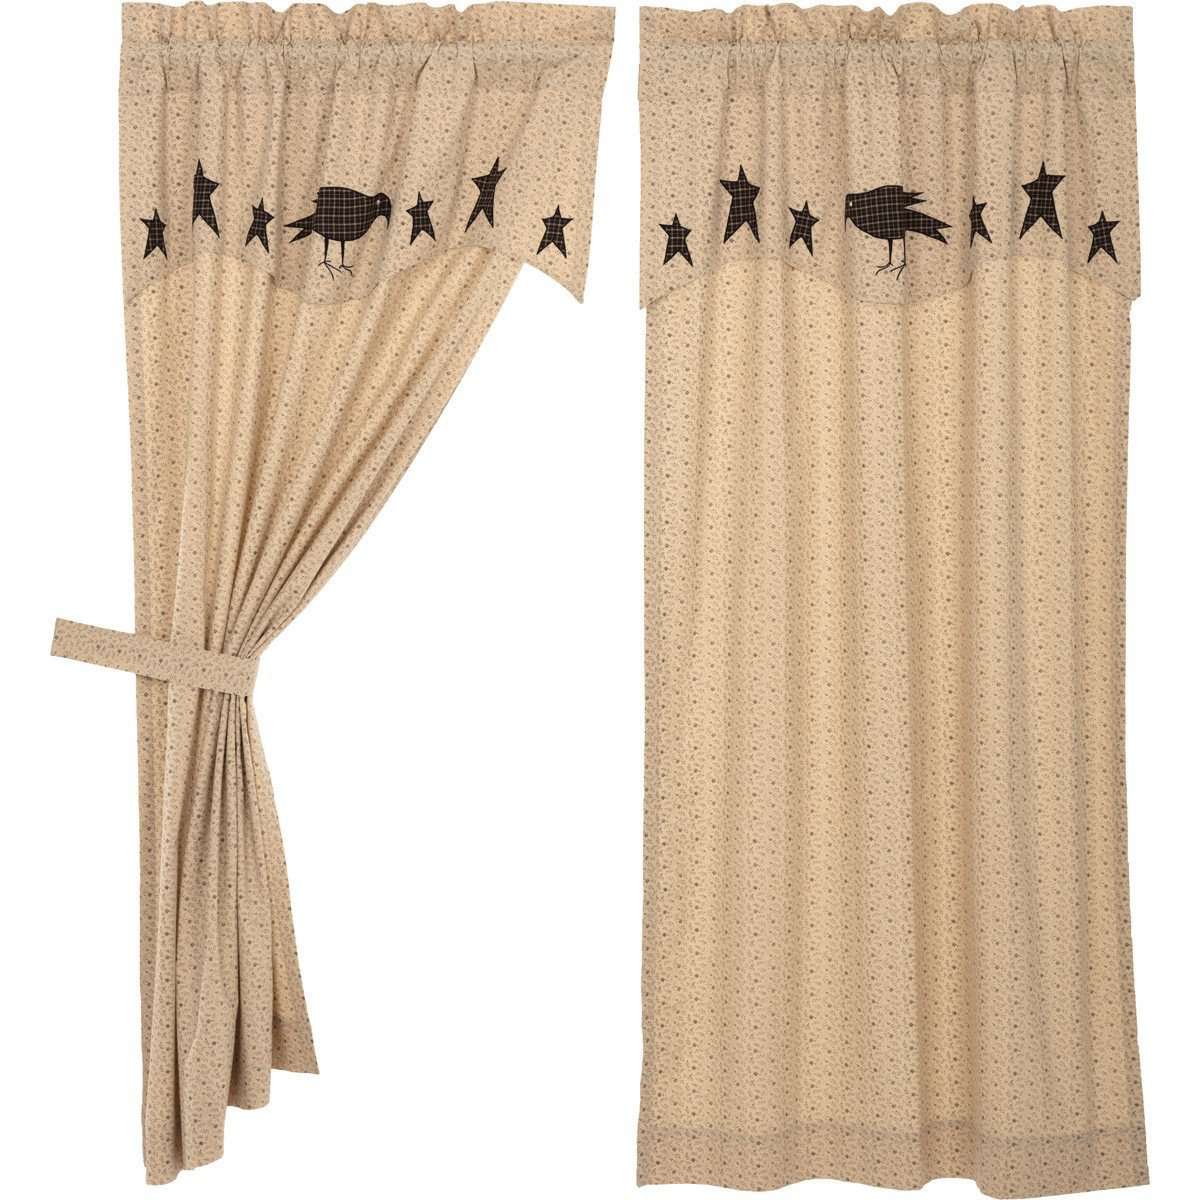 Kettle Grove Short Panel Curtain with Attached Applique Crow and Star Valance Set of 2 63x36 VHC Brands - The Fox Decor